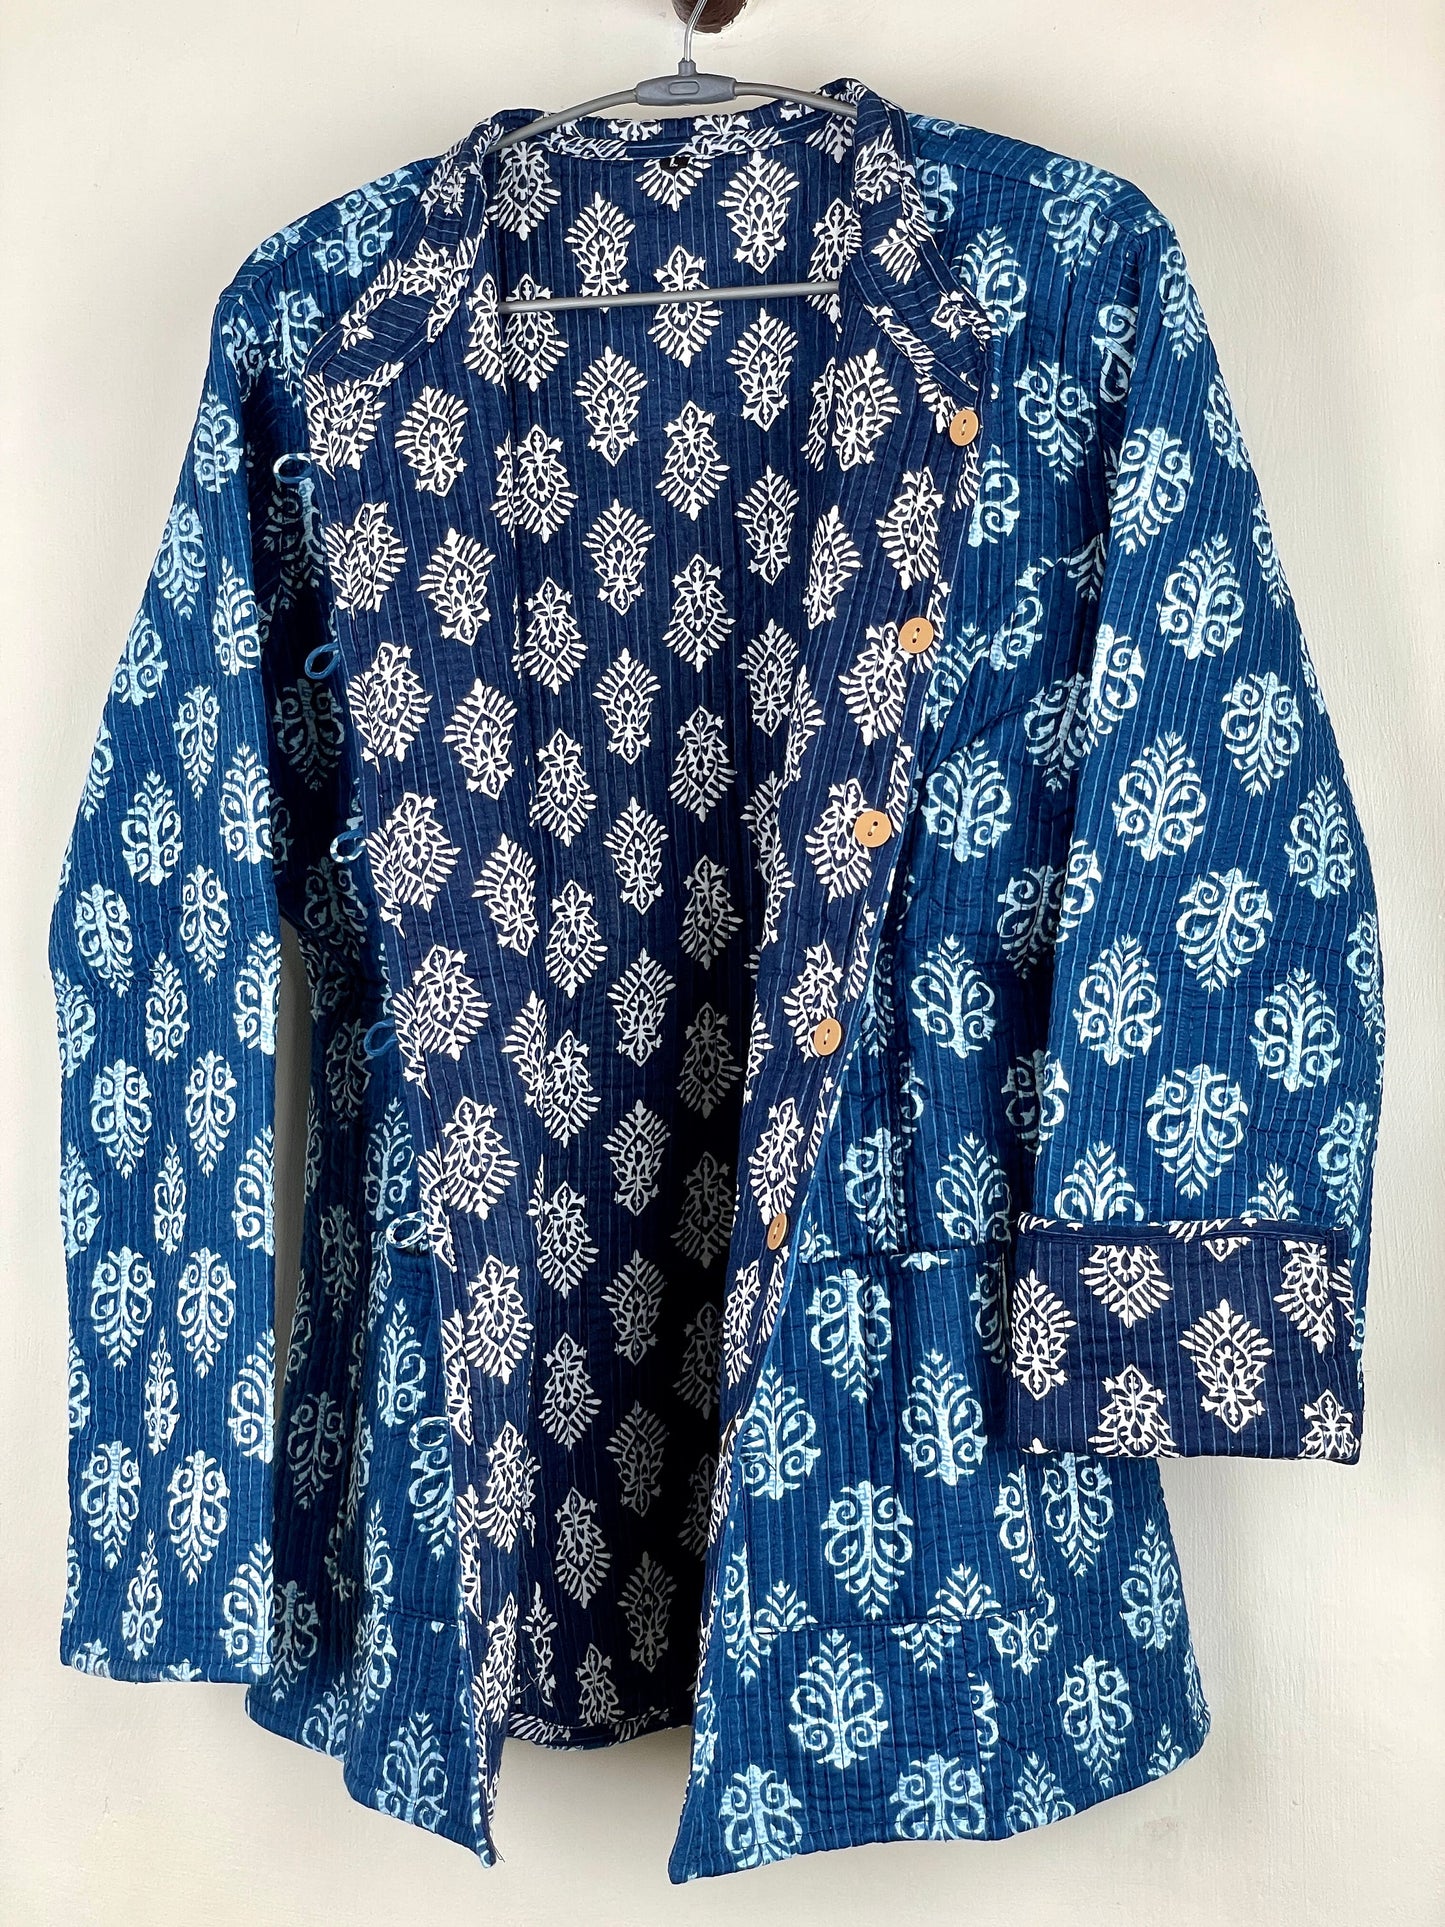 Indian Handmade Quilted Cotton Fabric Jacket Stylish Blue & White Floral Women's Coat, Reversible Waistcoat, Christmas Gift for Her